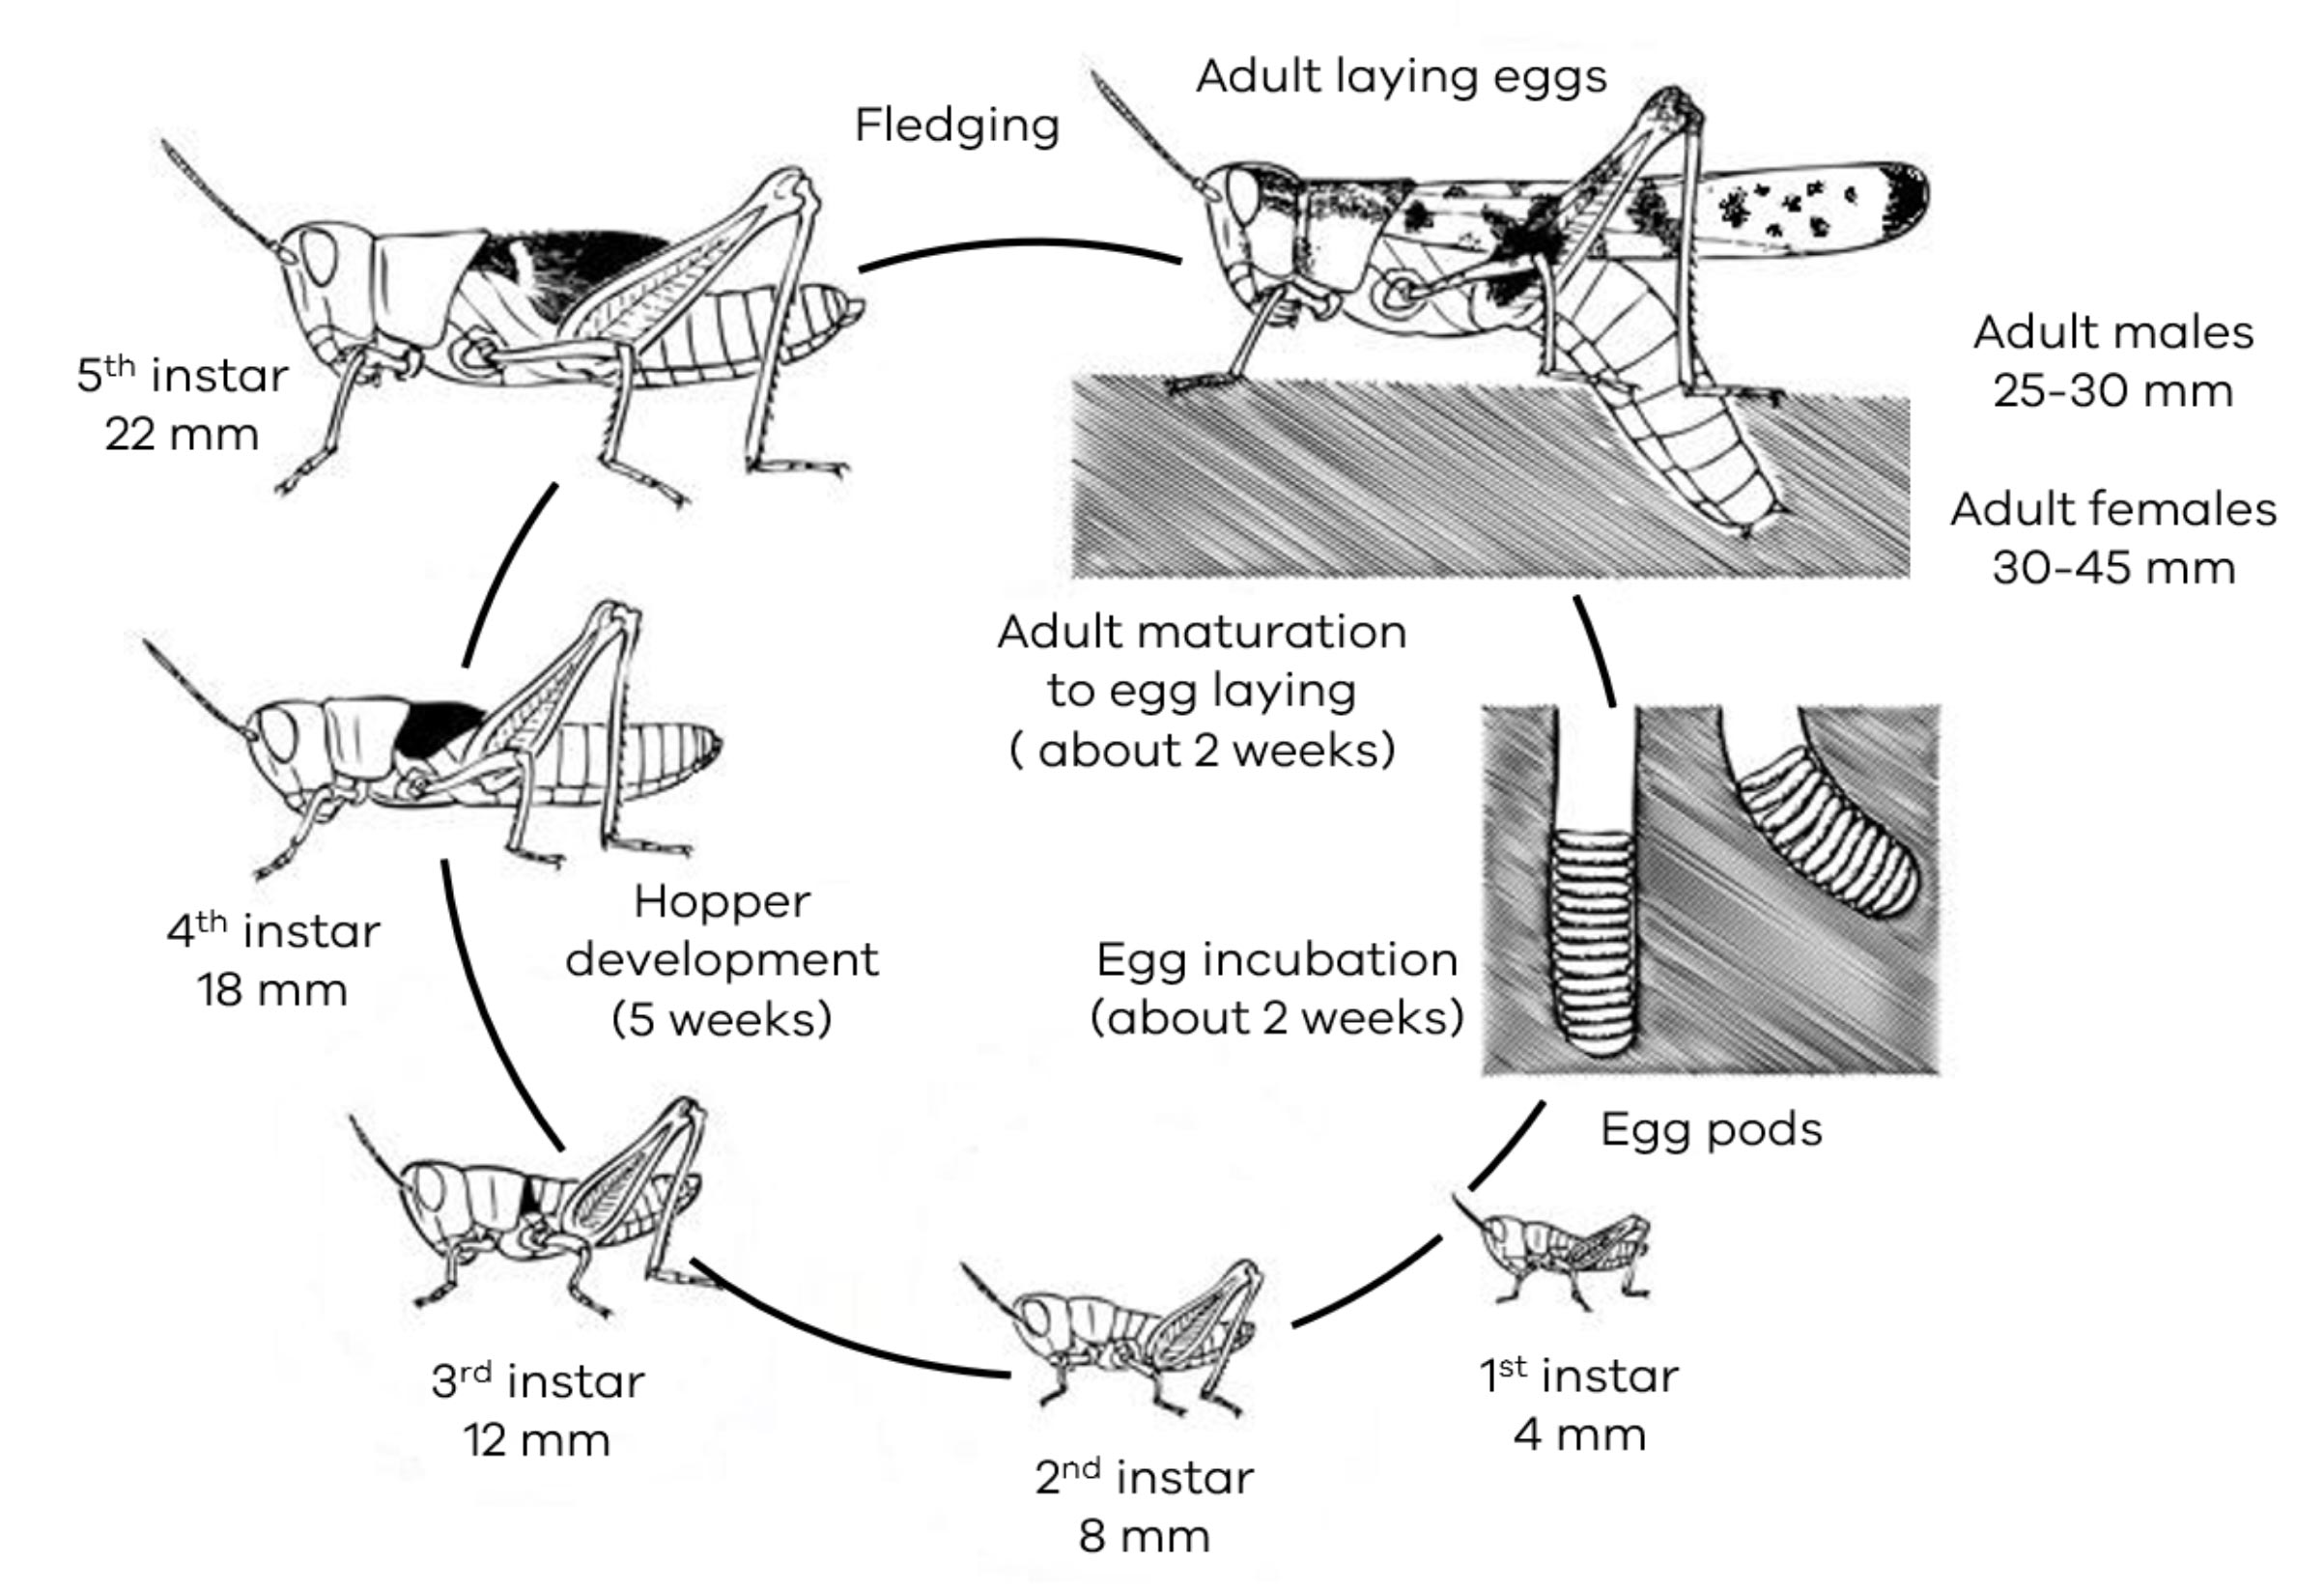 6 stages of locust lifecycle — Female lays eggs, egg pods hatch, baby locust starts at first instar then moves on to second, third, fourth and fifth instar becomes hopper then adult.